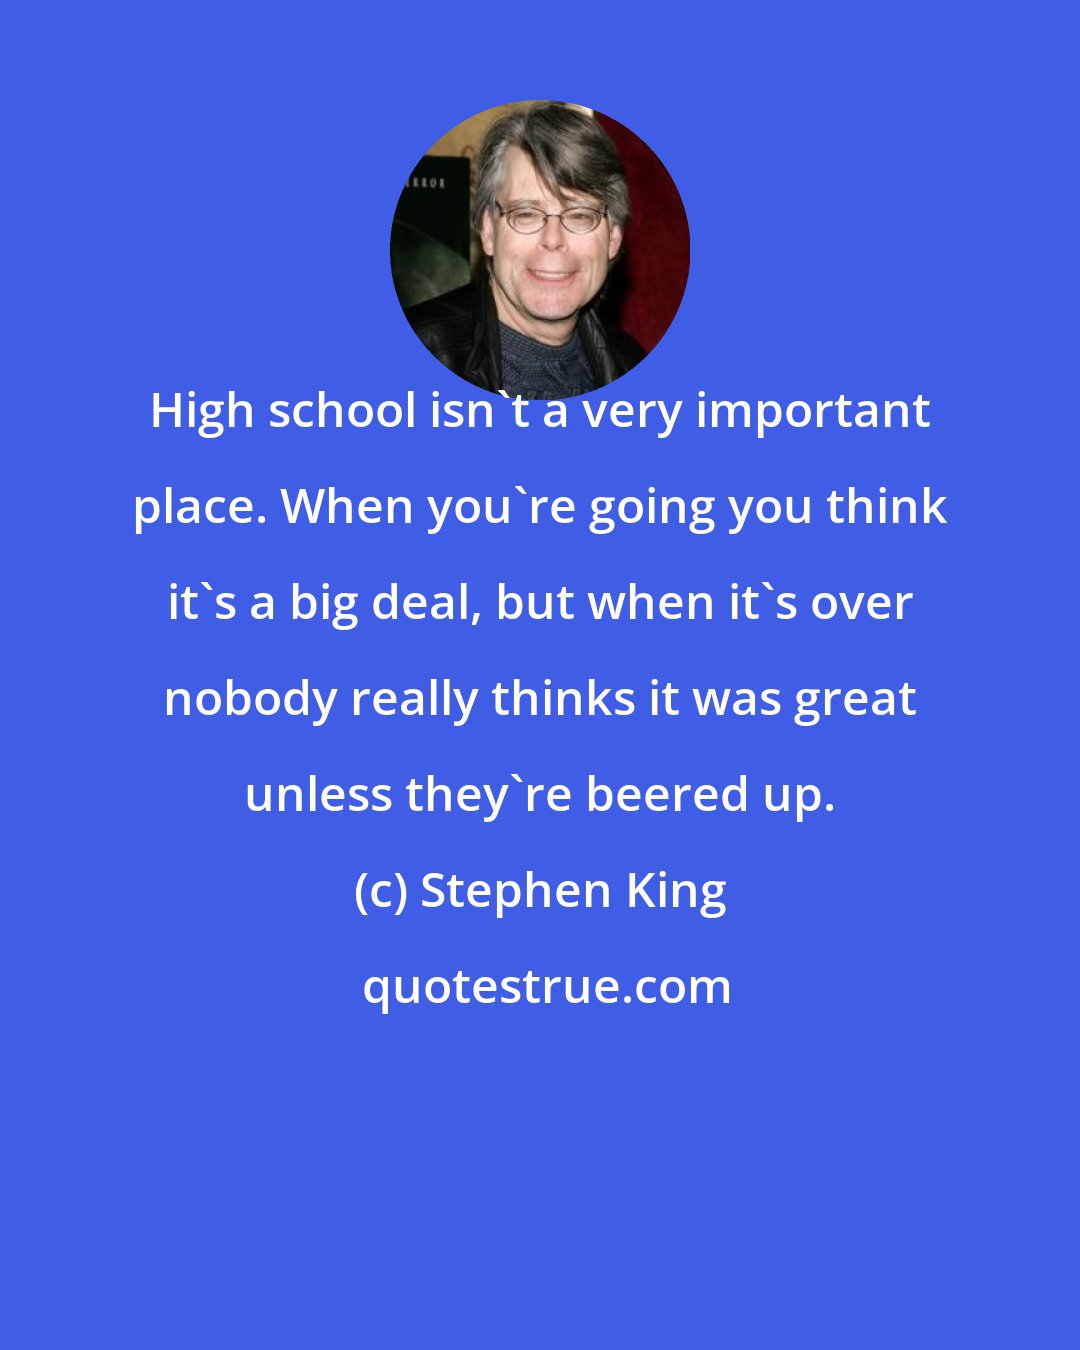 Stephen King: High school isn't a very important place. When you're going you think it's a big deal, but when it's over nobody really thinks it was great unless they're beered up.